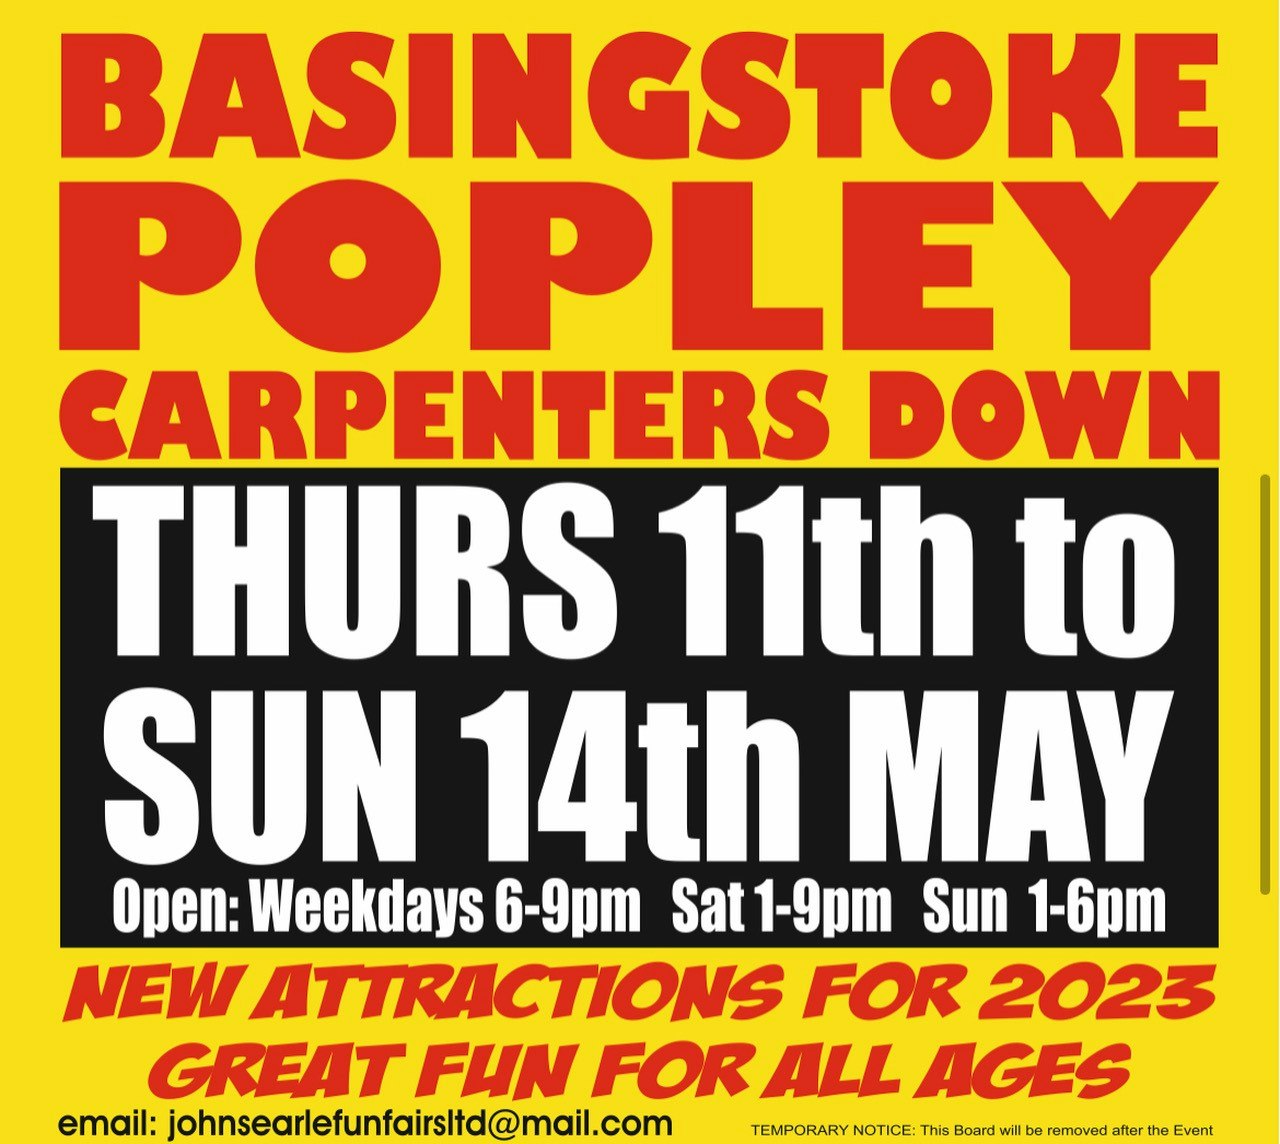 Carpenters Down, Thurs 11th to Sun 14th May. Open weekdays 6 to 9pm, Sat 1pm to 9pm and Sun 1pm to 6pm. New attractions for 2023, great fun for all ages.